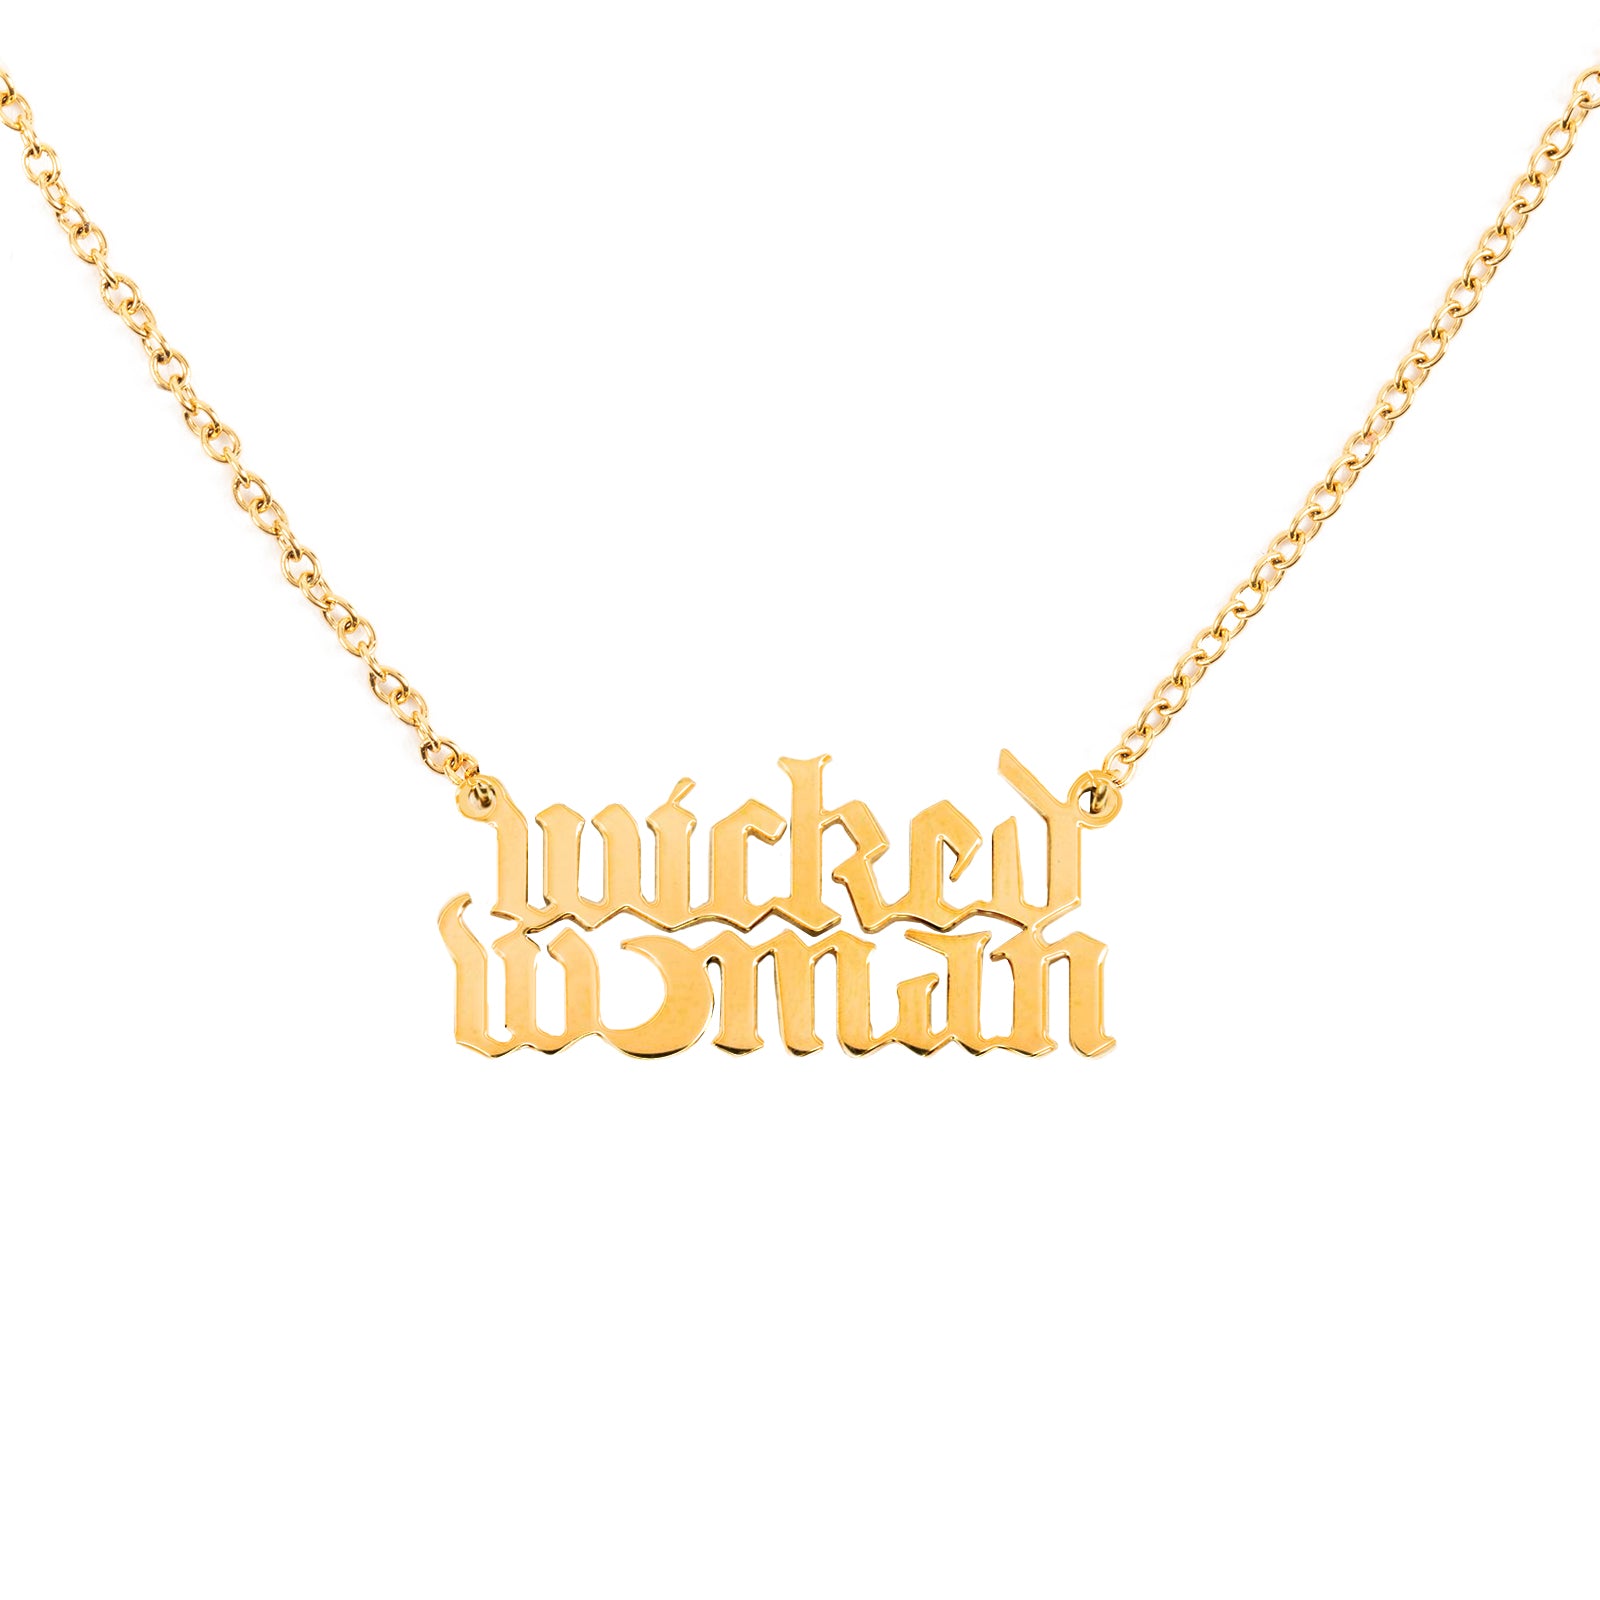 Wicked Woman Gold-Plated Necklace